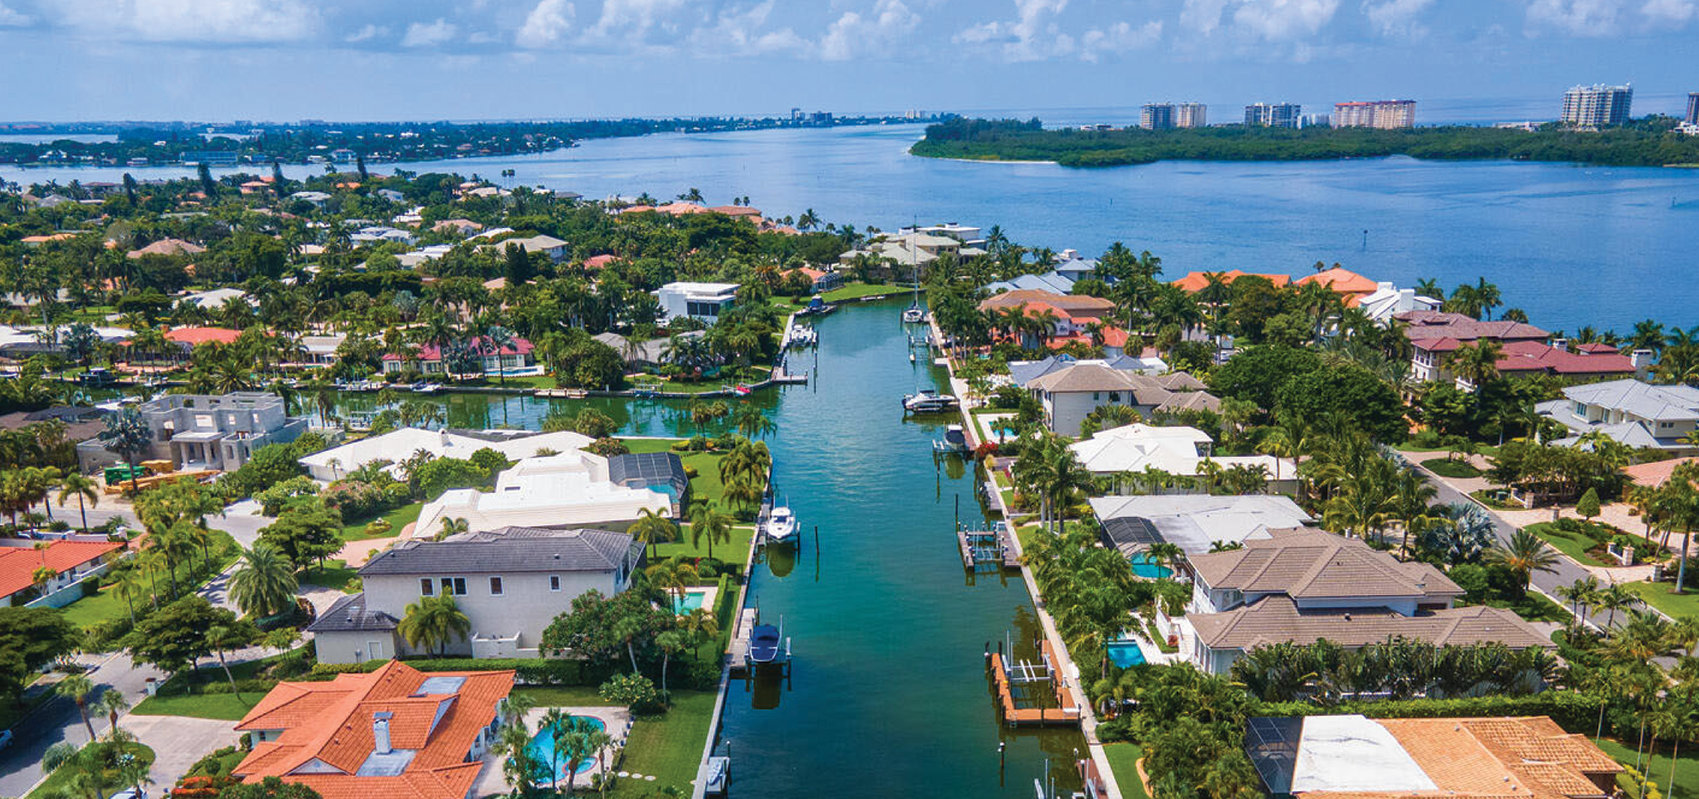 Selling Your House In Sarasota? Your Asking Price Matters More Now Than Ever